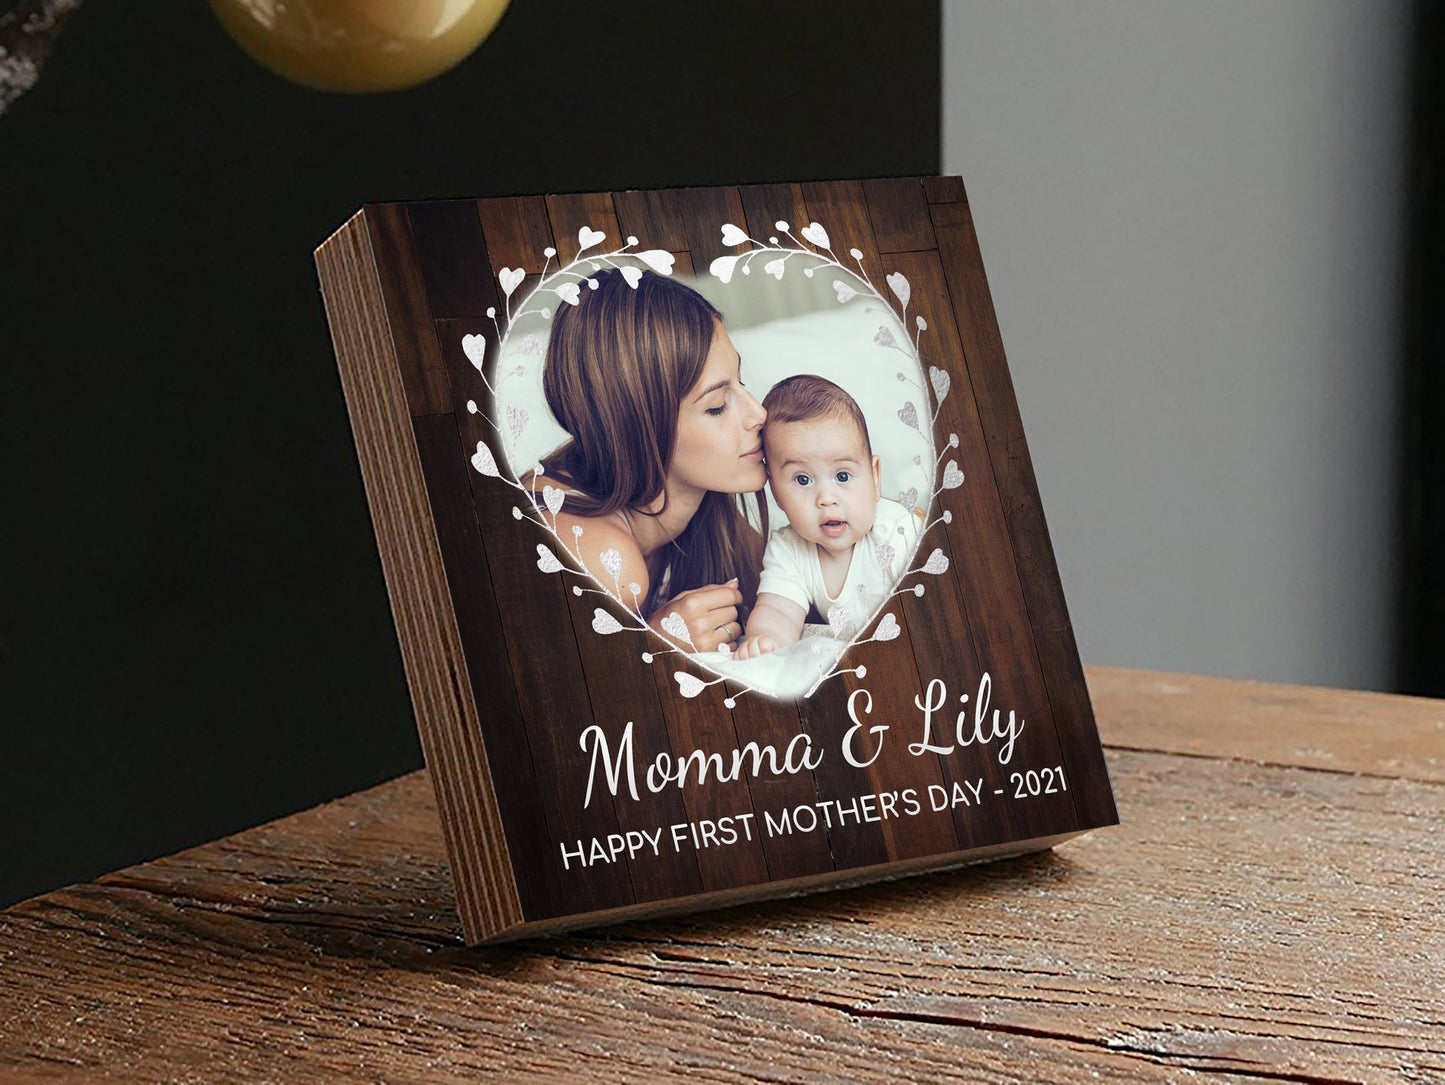 Happy First Mother's Day Gift- 4" or 6" Personalized Photo Block - New Mom Gift - Wife Gift Picture - New Family Photo Gift For Mother's Day